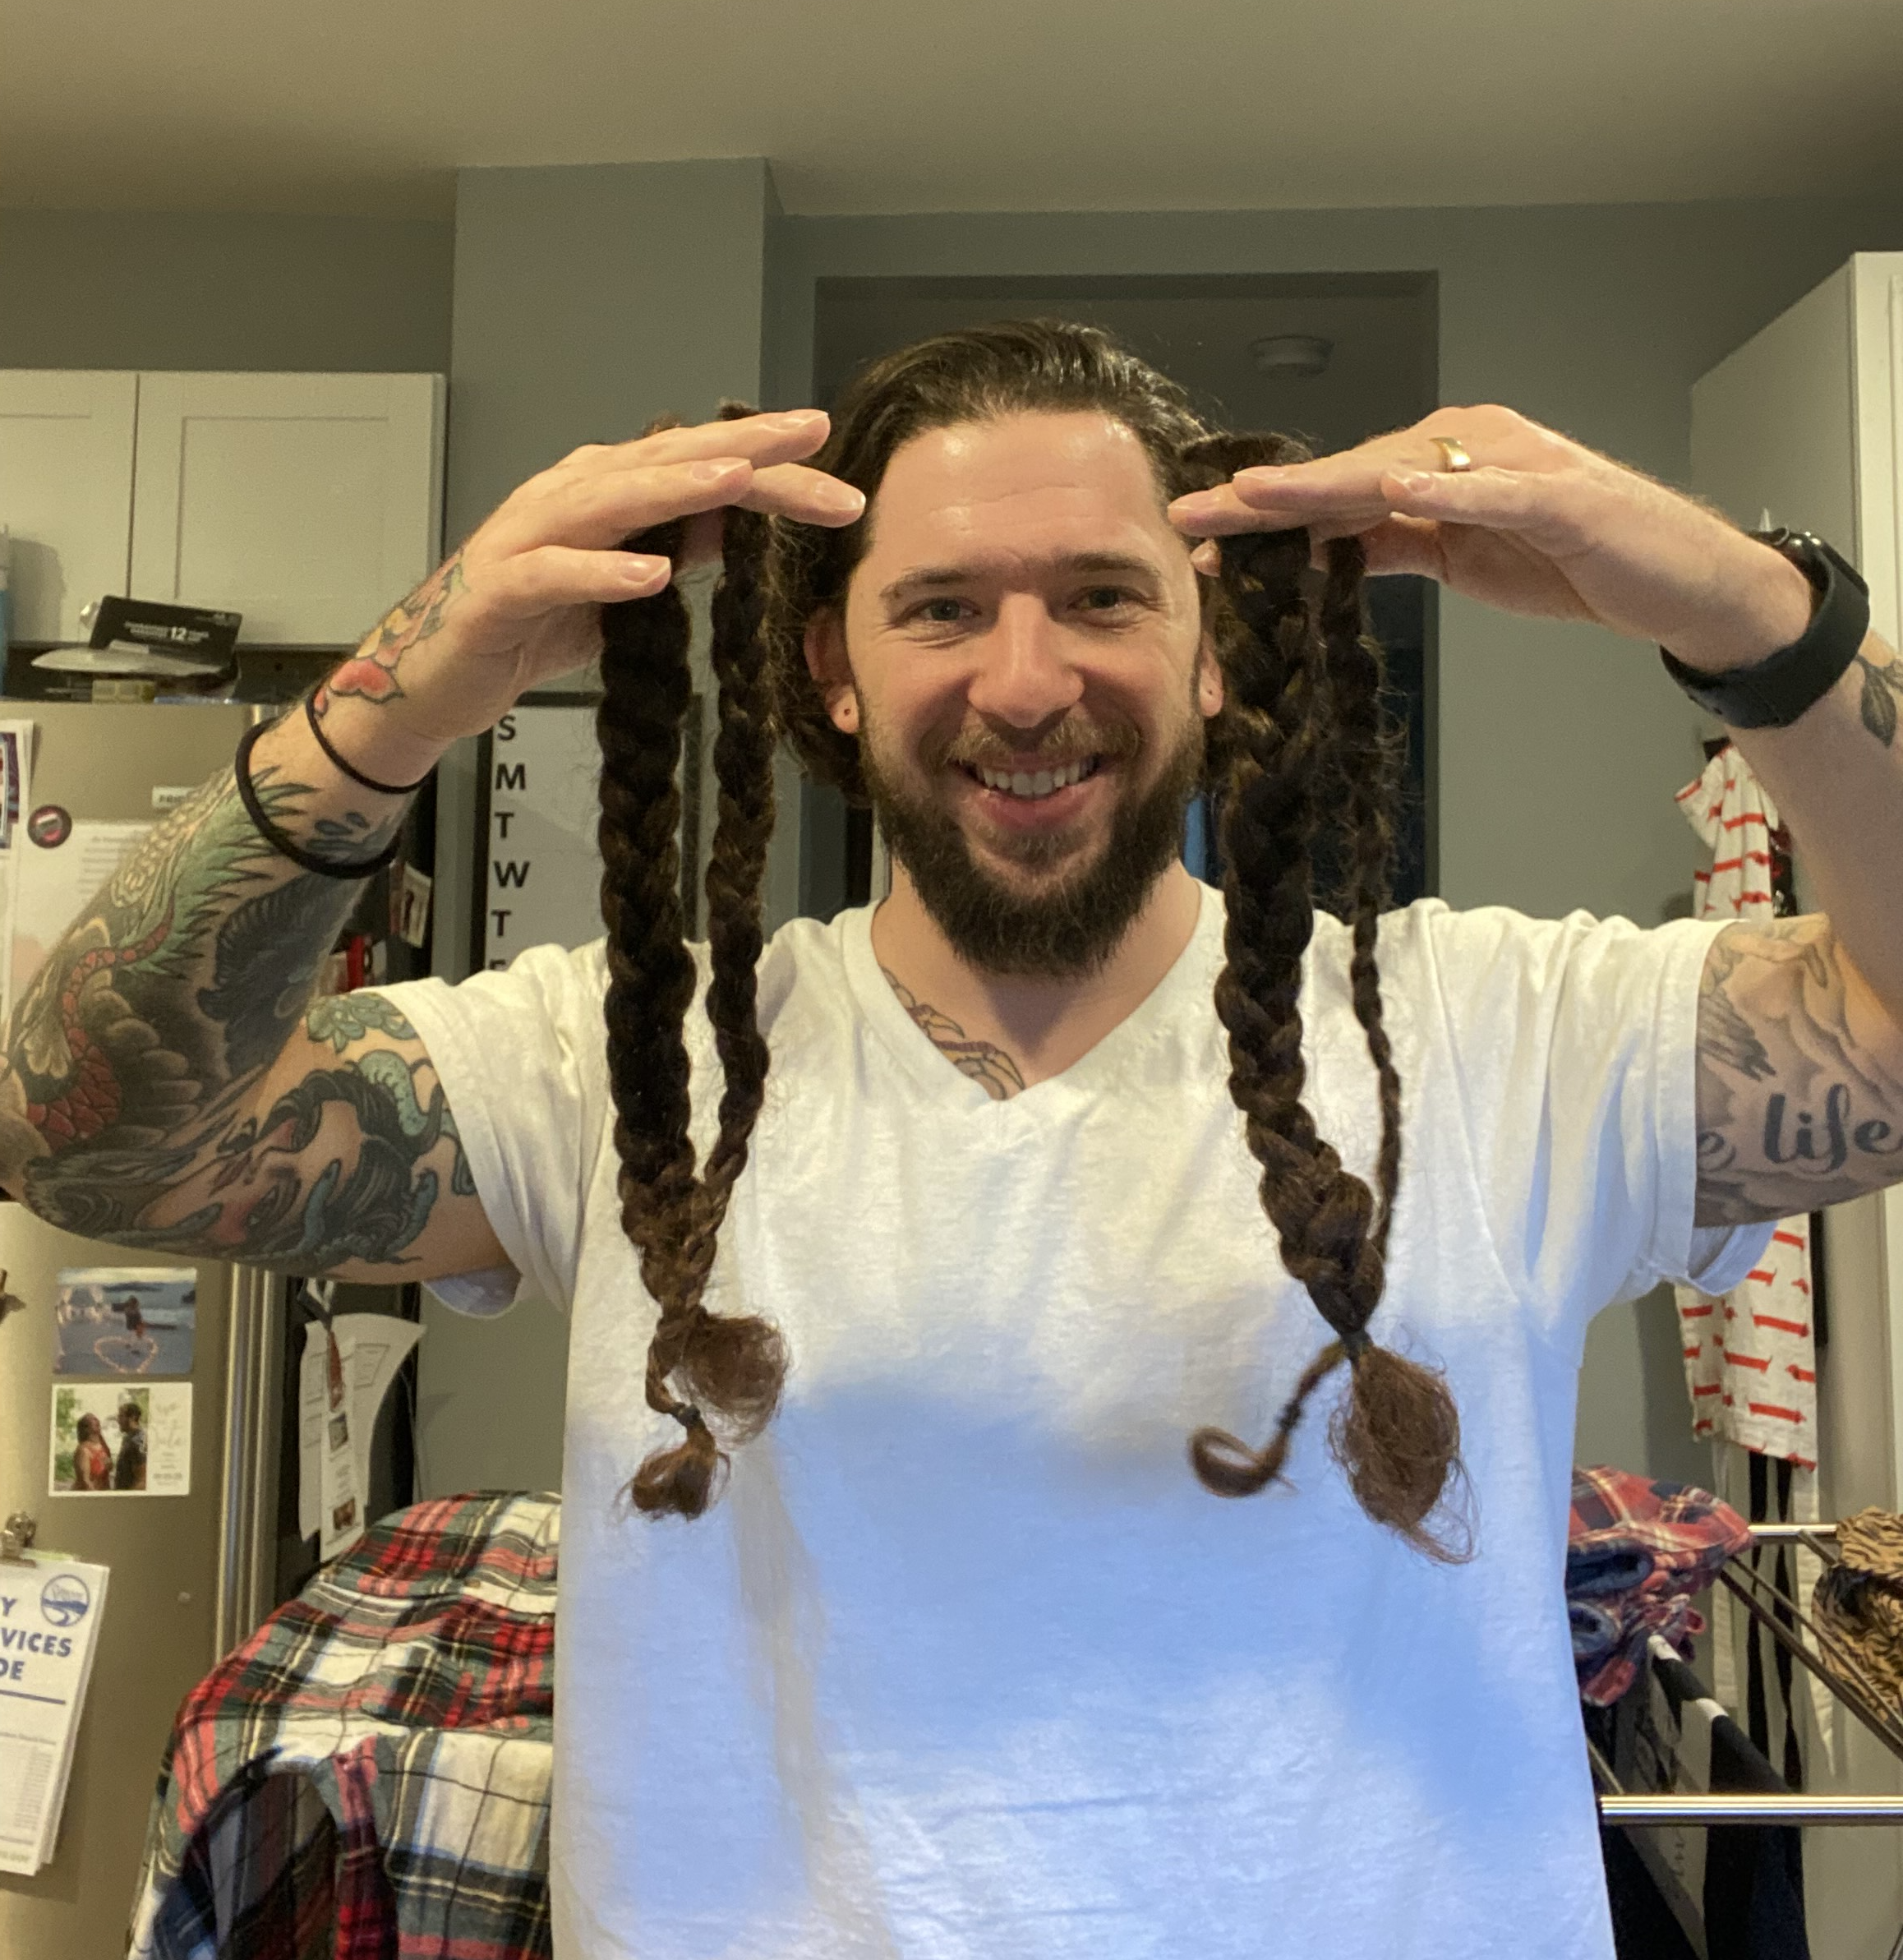 Click to read article: Matthew Gives Gift of Hair & Raises Funds'